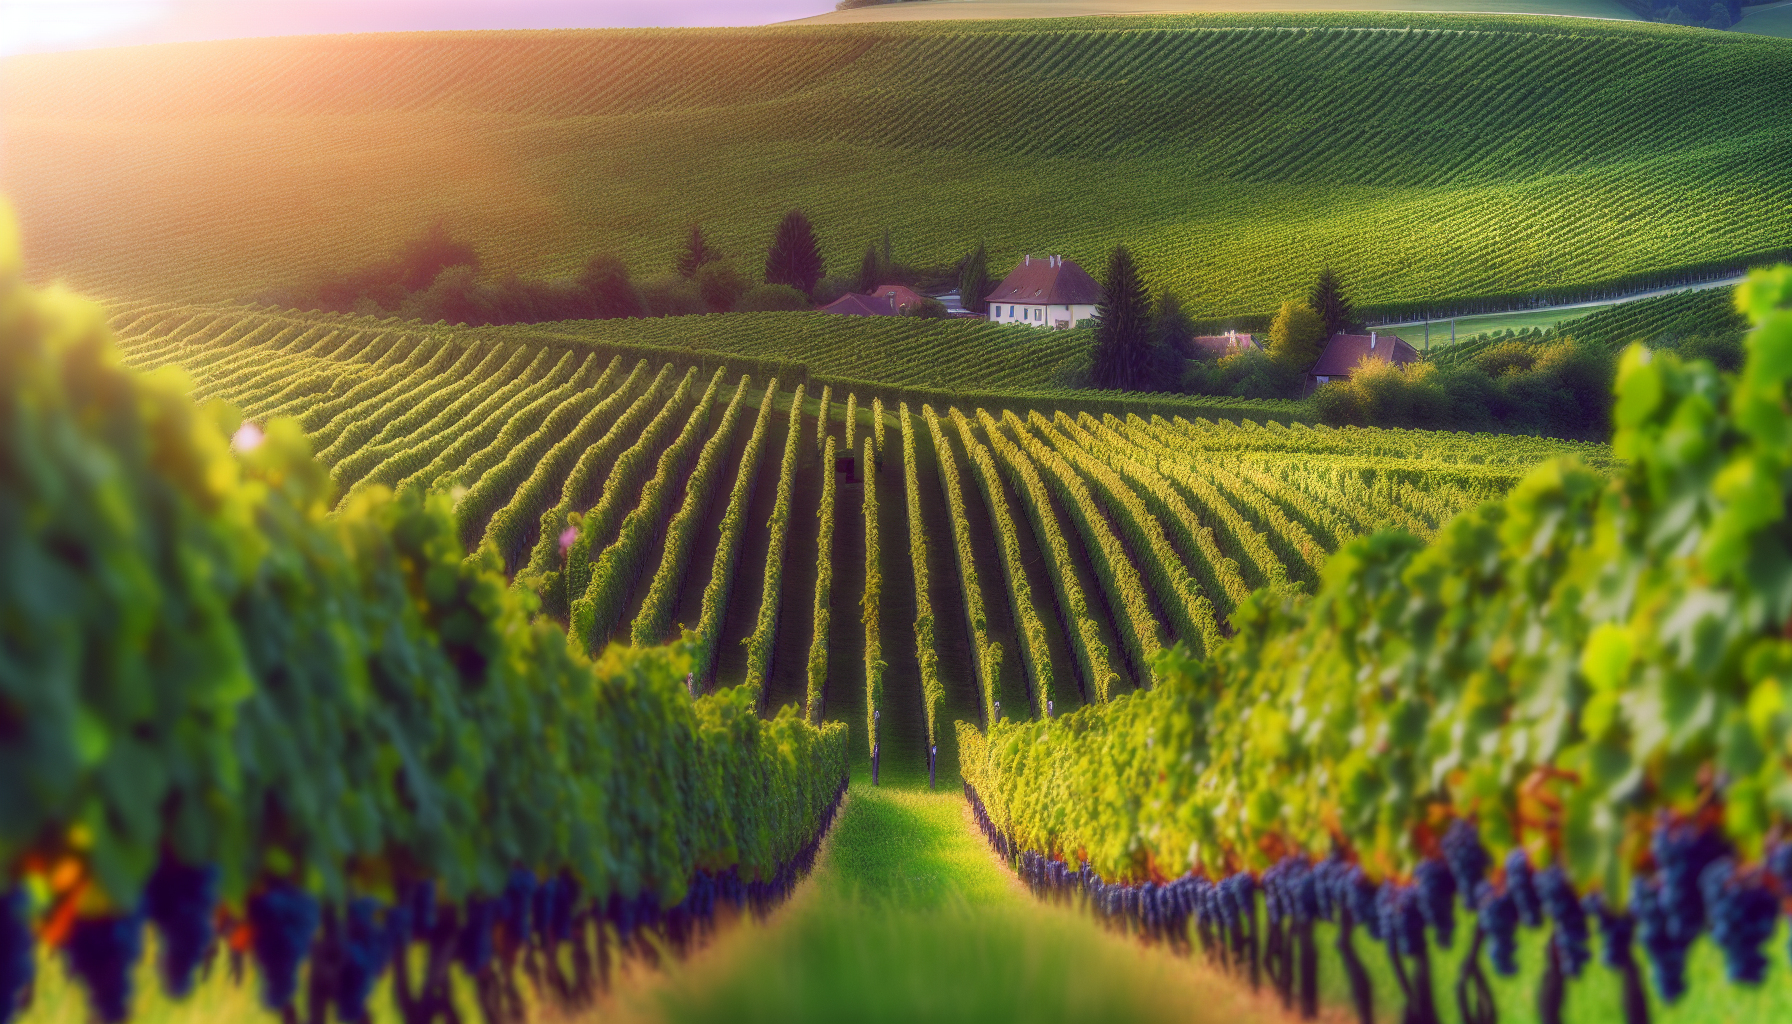 A vineyard with rows of grapevines under the sunlight